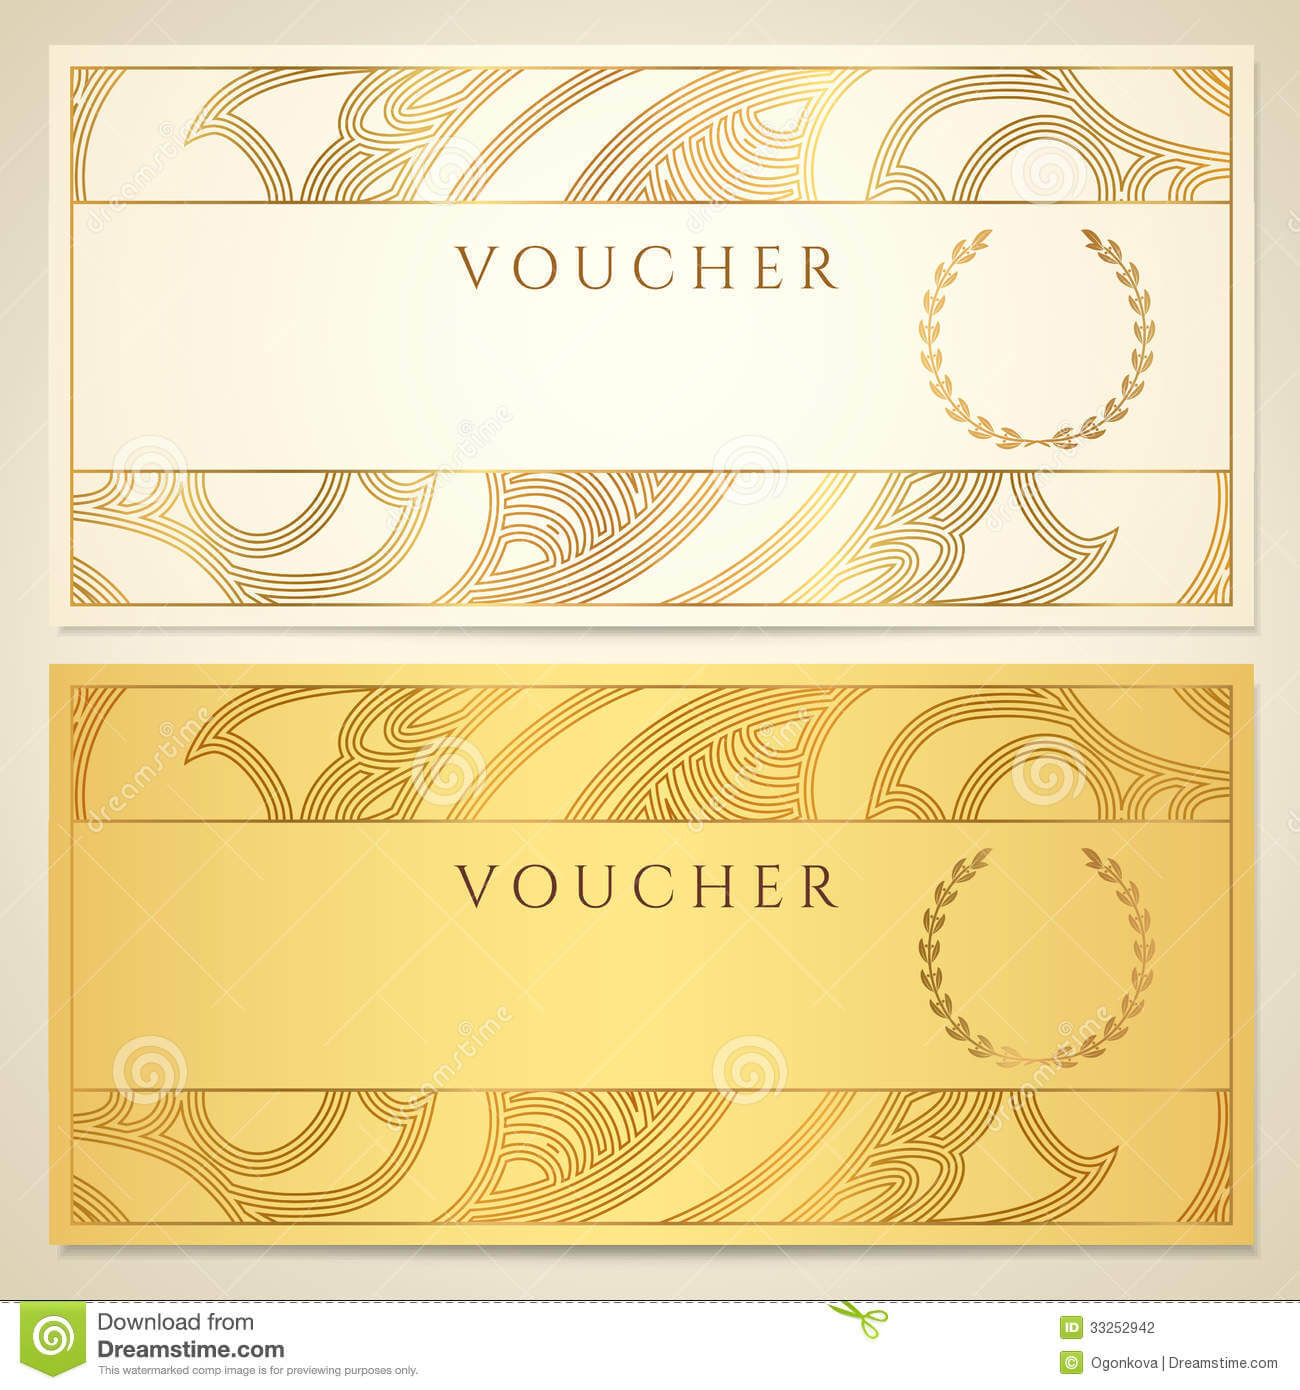 clipart-gift-certificate-template-throughout-dinner-certificate